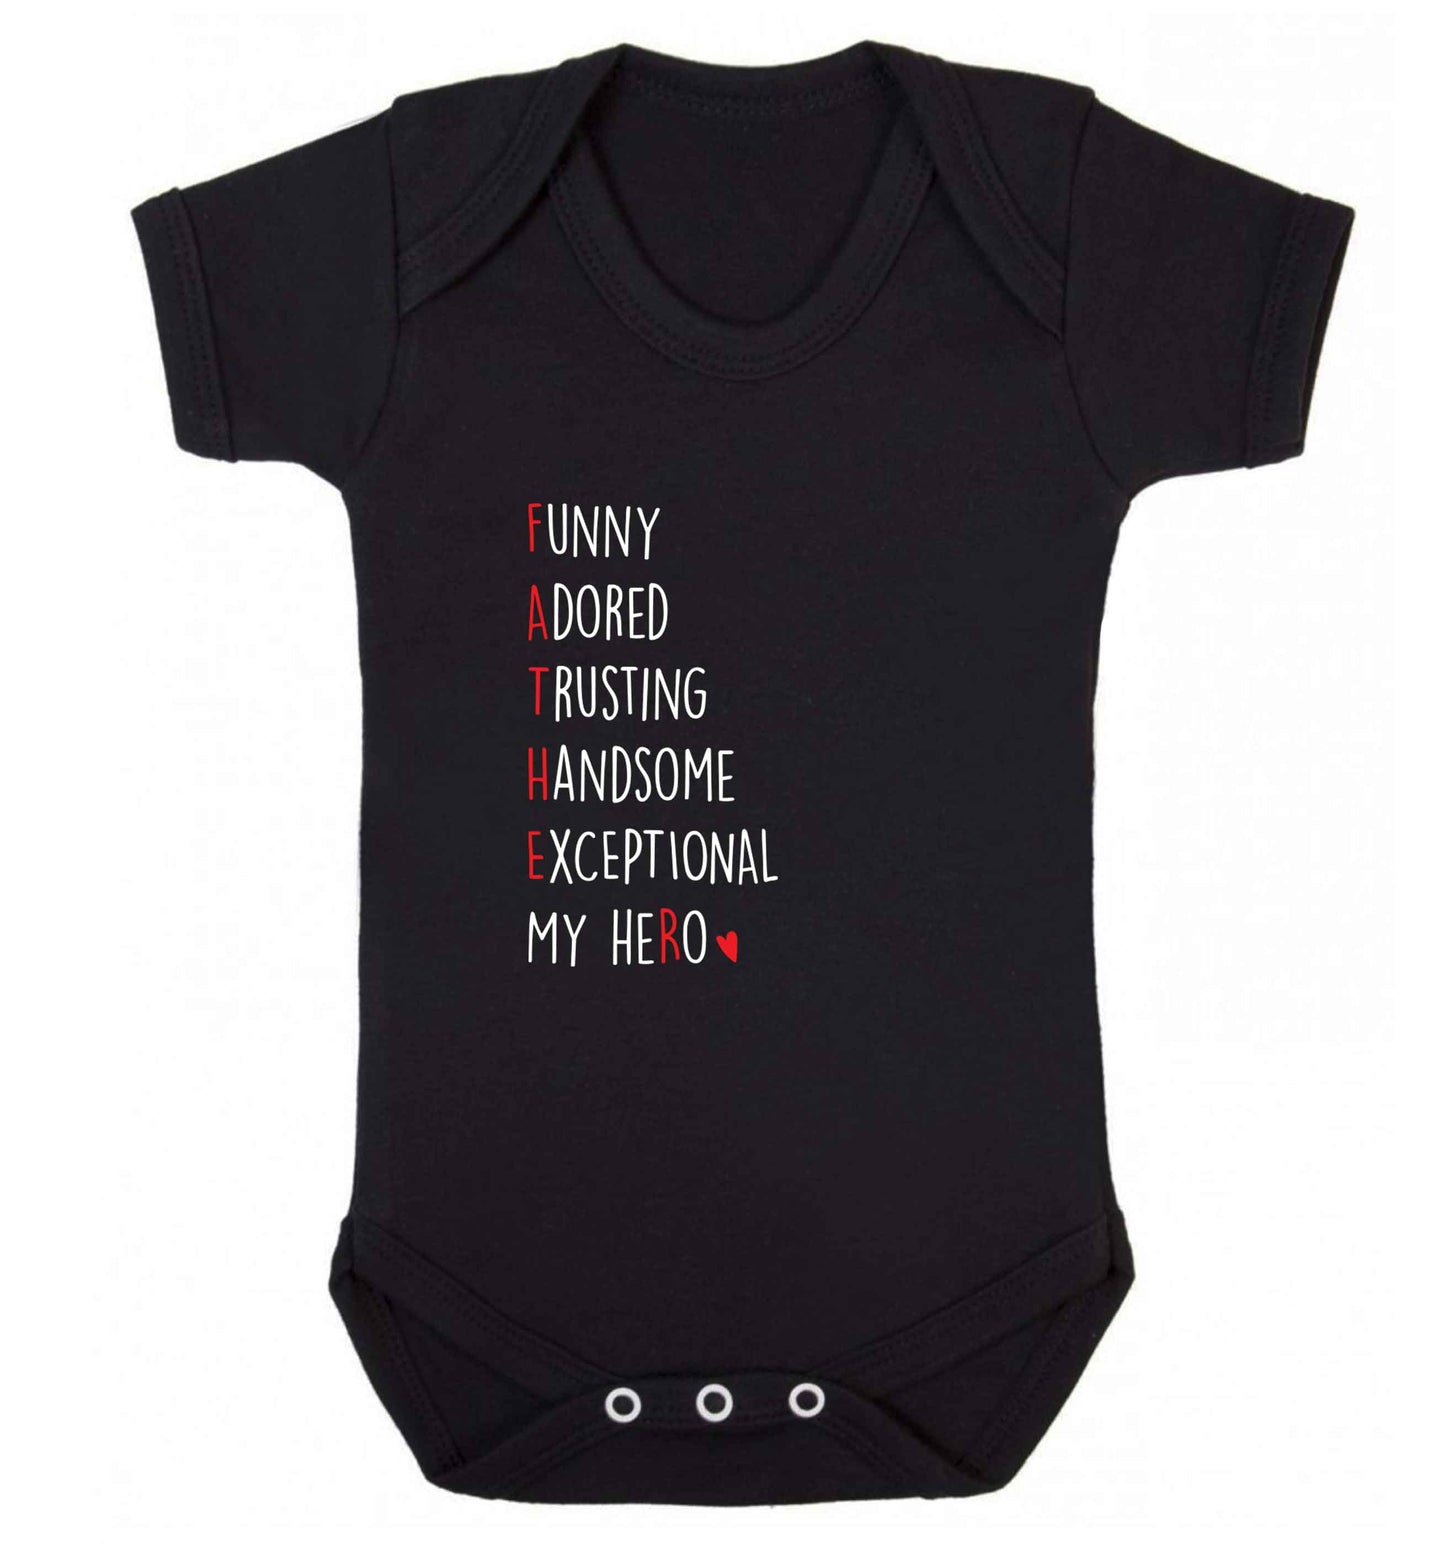 Father, funny adored trusting handsome exceptional my hero baby vest black 18-24 months